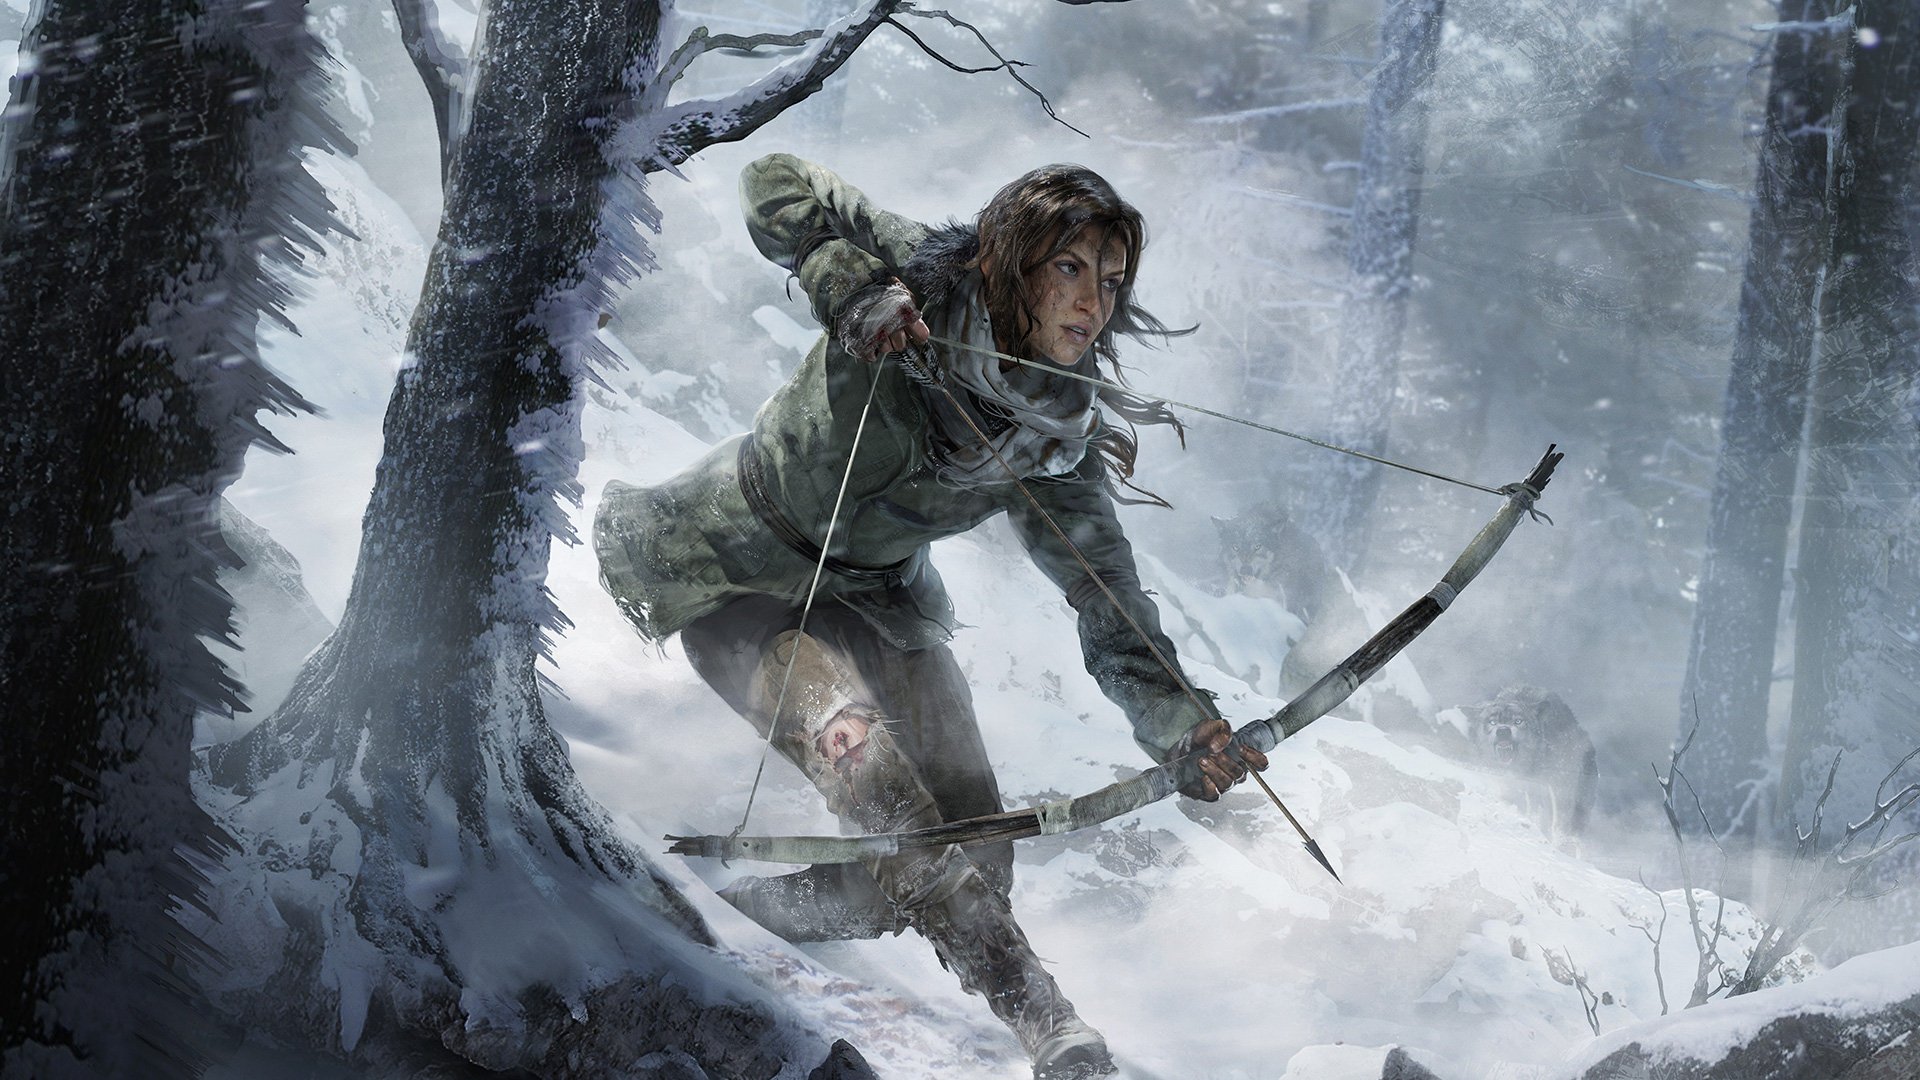 Fans can't stand The Rise of Tomb Raider Xbox One exclusive, but the wording offers hope.